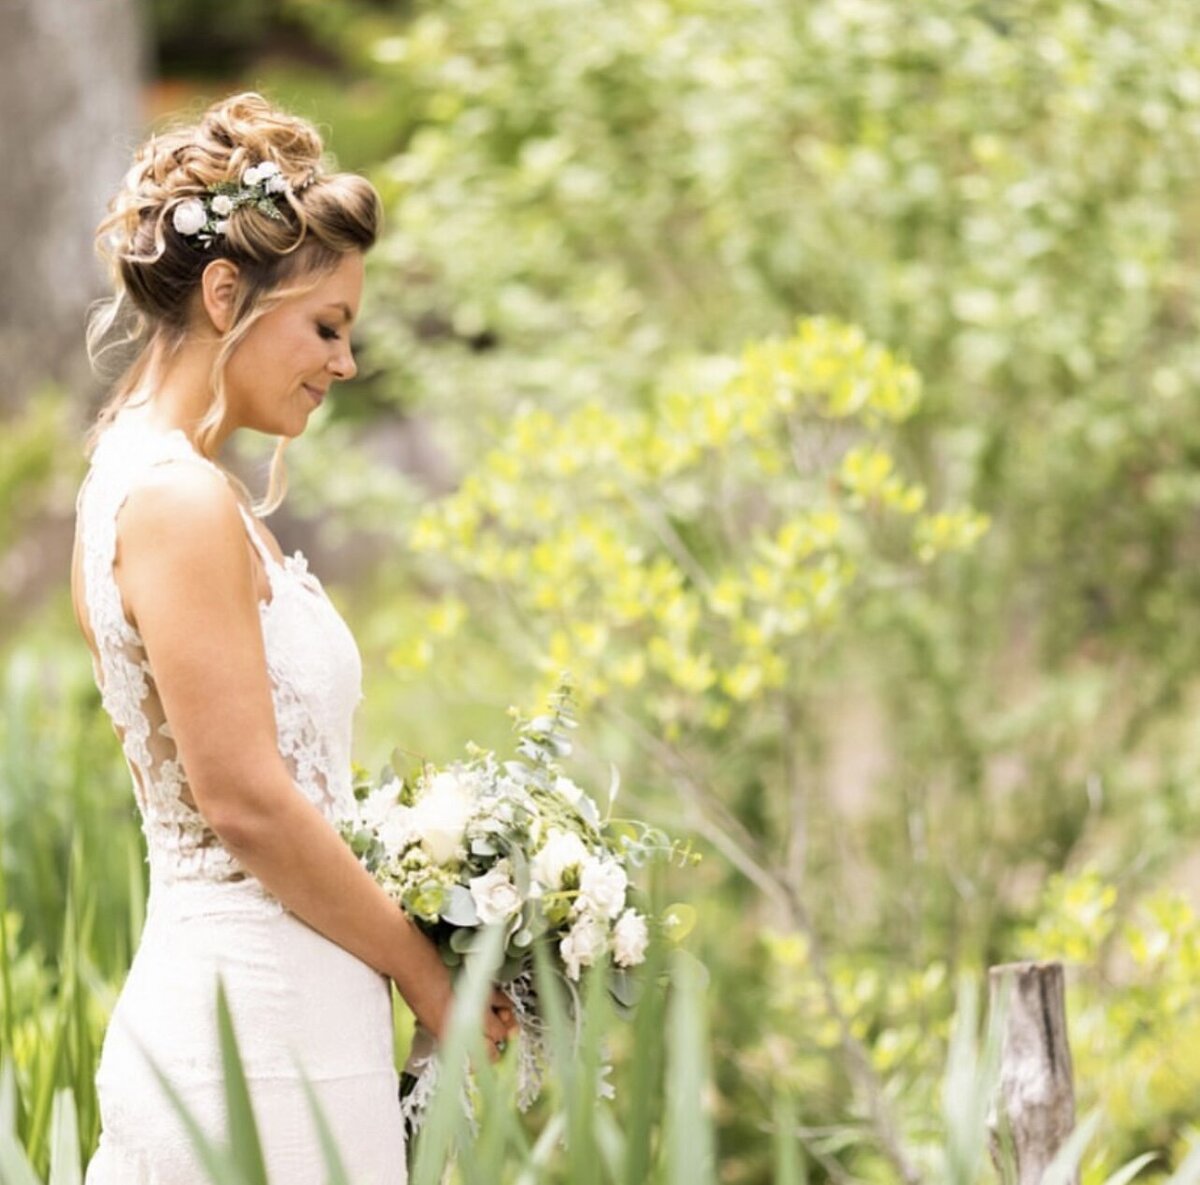 Bride with updo wearing flowers in hair